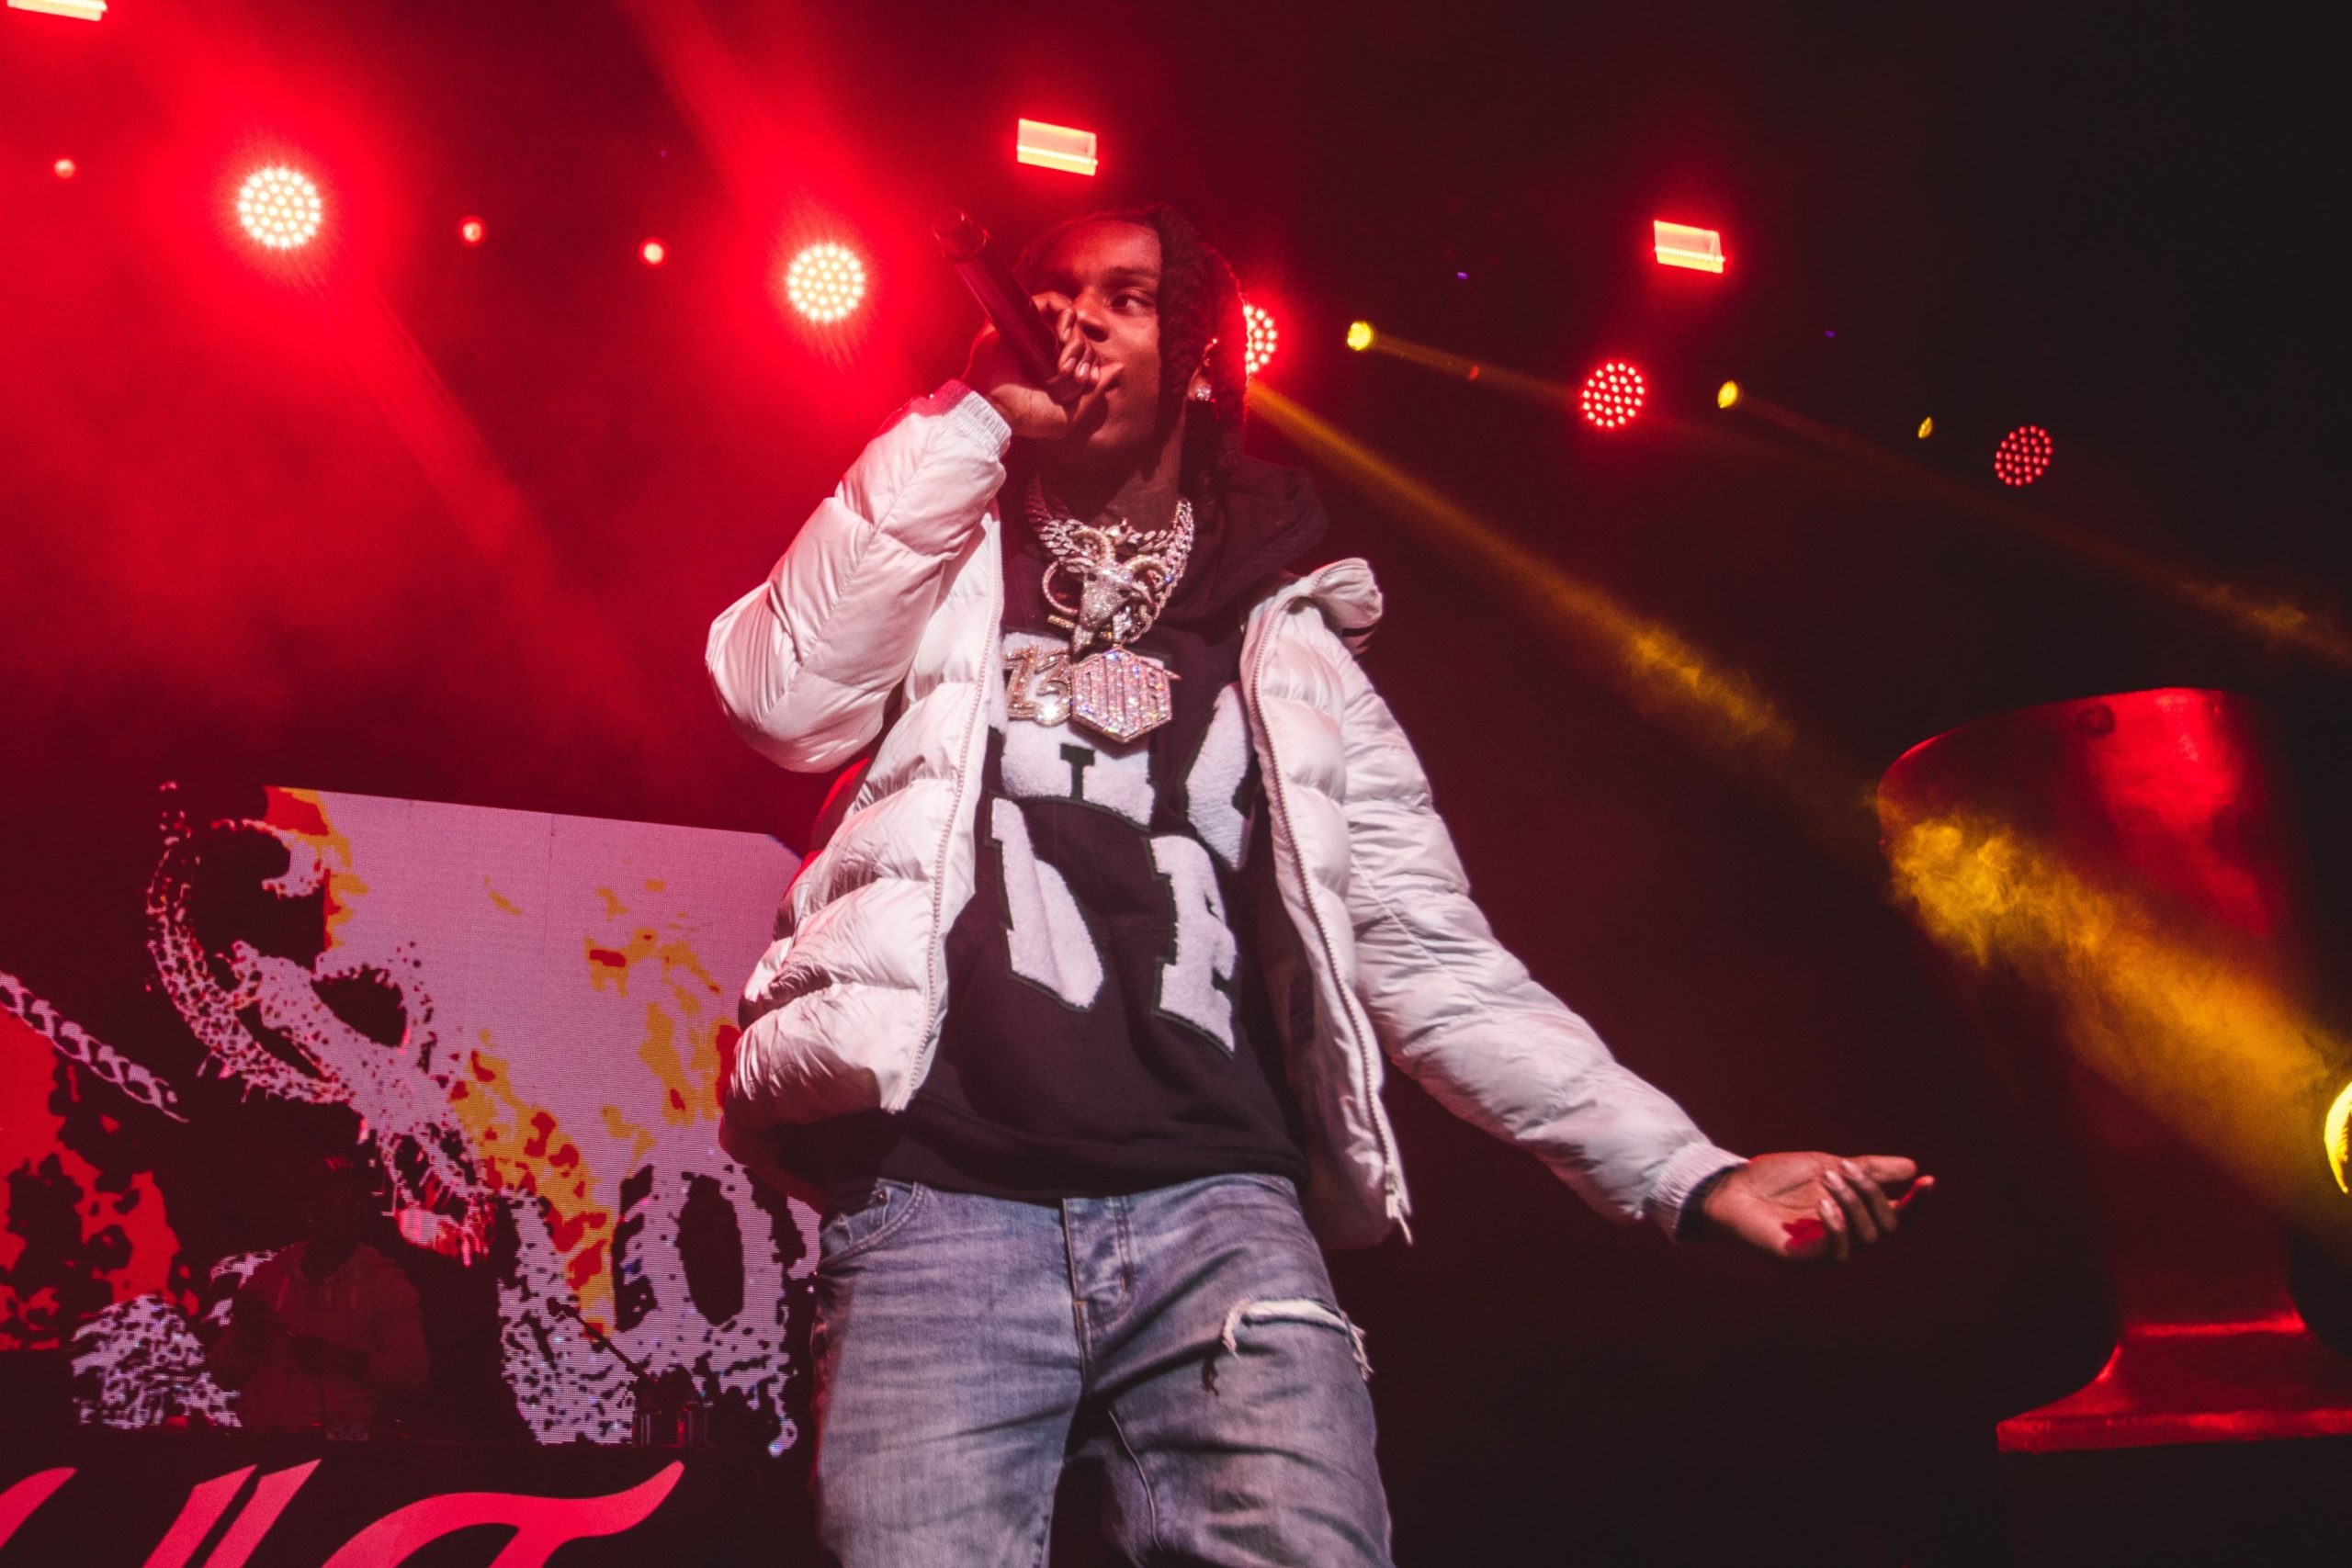 Polo G Album Delayed Amid Felony Arrests, No Change in Tour Schedule